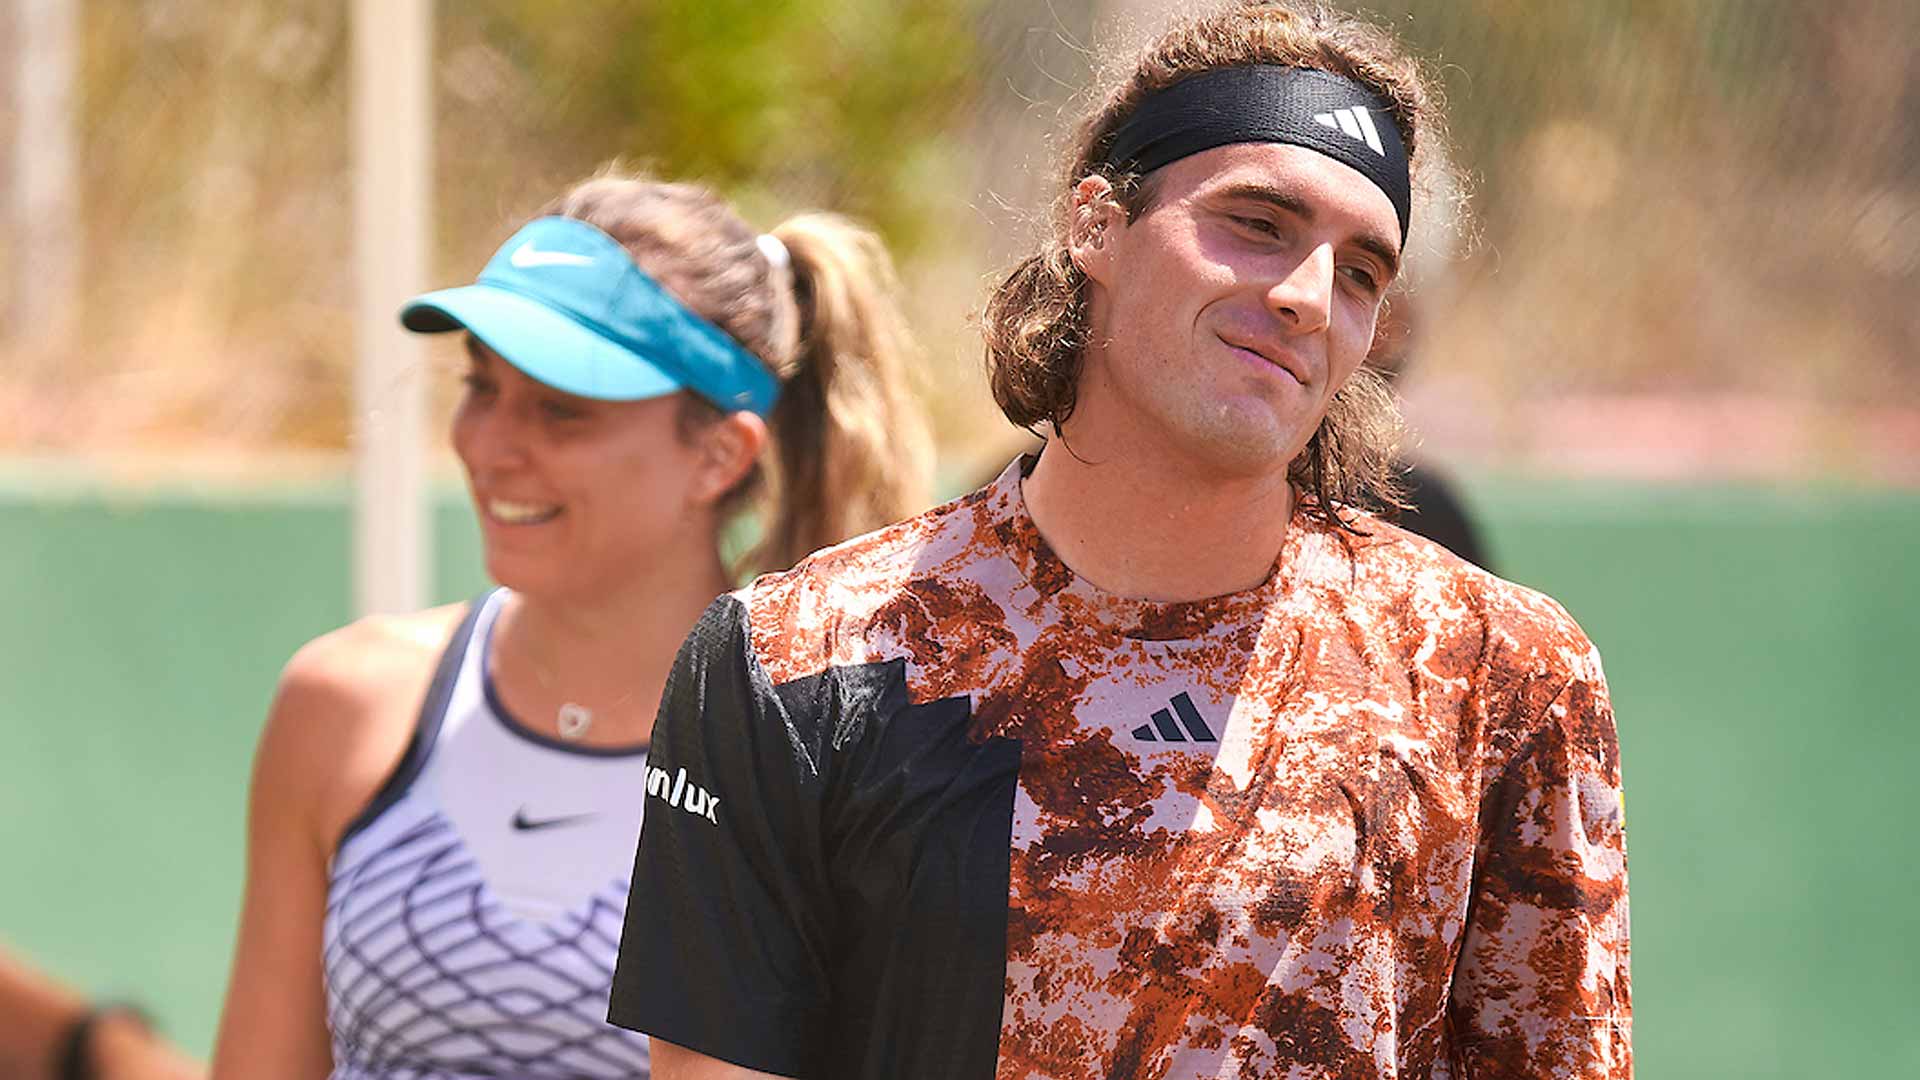 Paula Badosa and Stefanos Tsitsipas practised together last week at the Mallorca Championships, where Tsitsipas competed in the ATP 250 event.